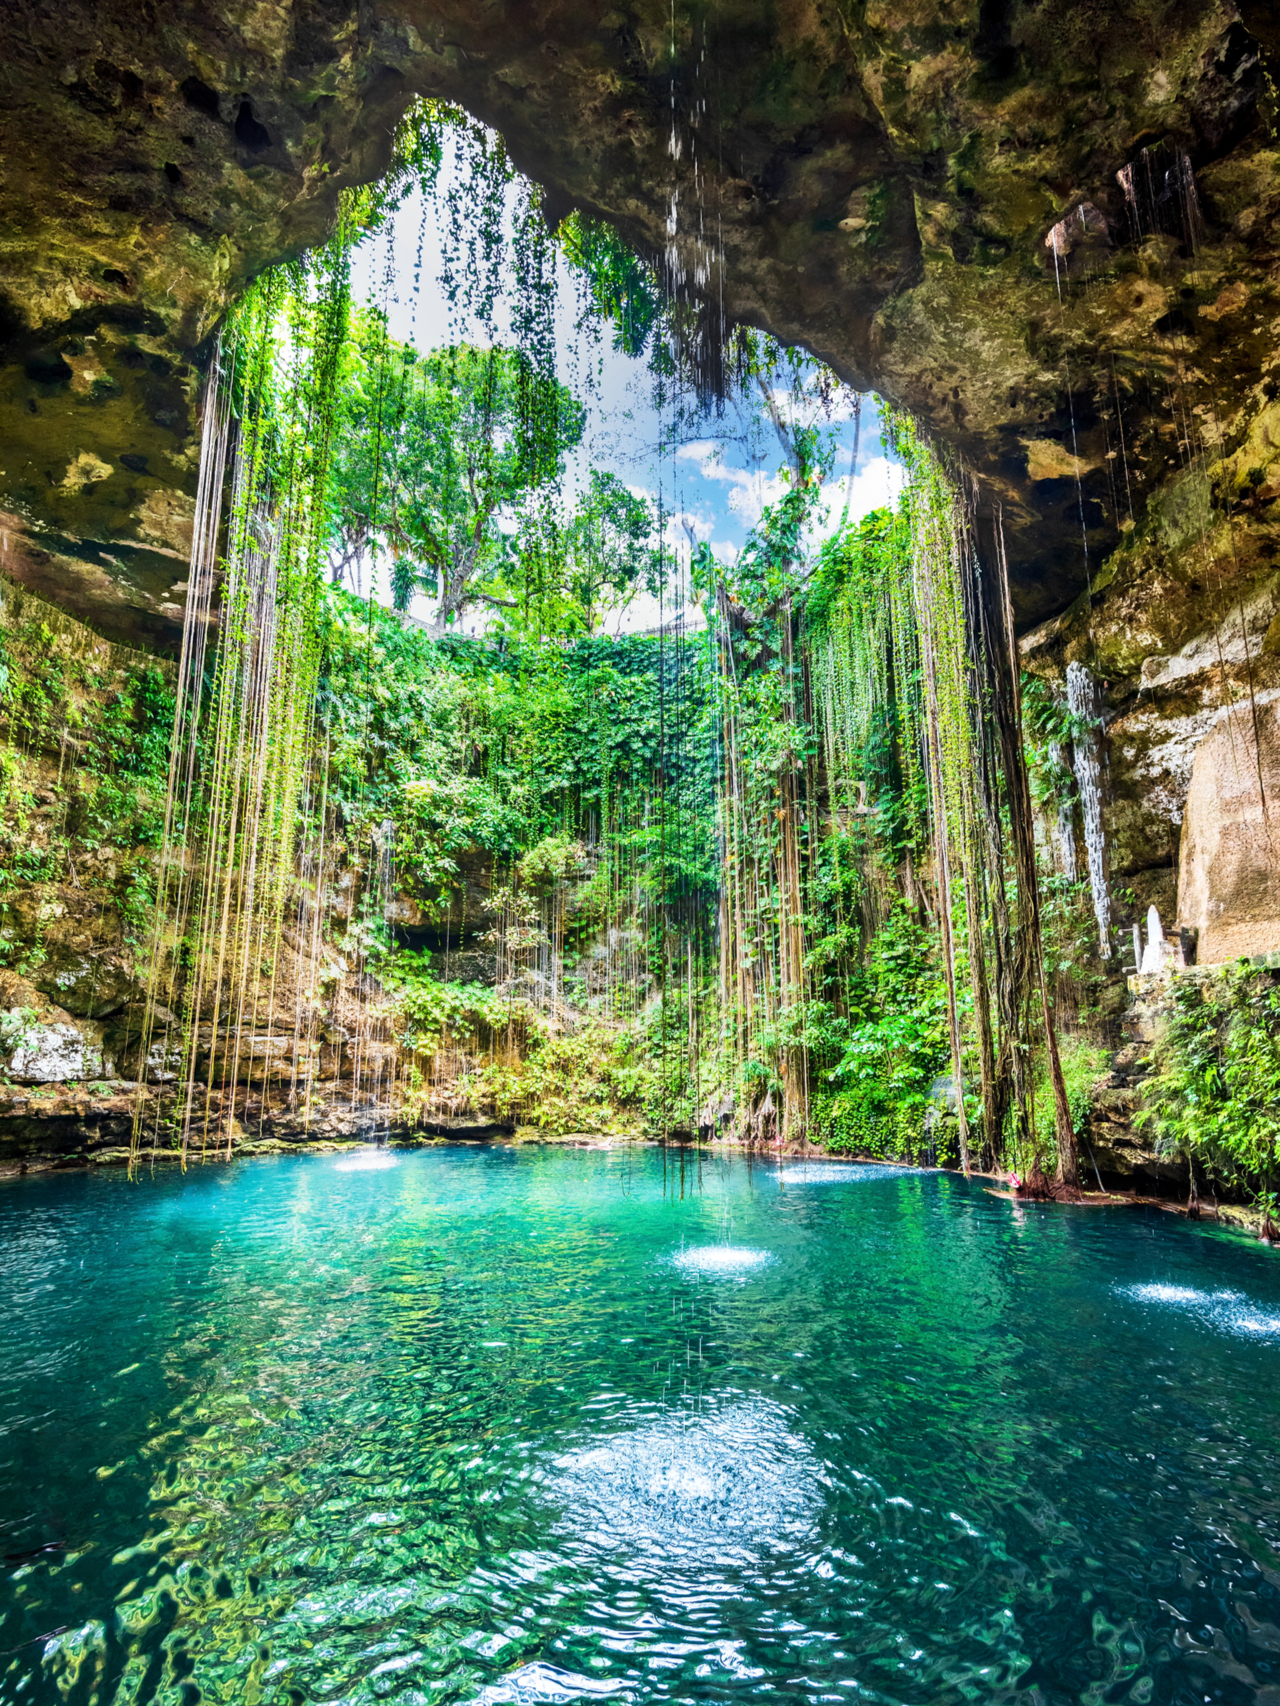 10 Amazing Places to Visit in Mexico in 2023